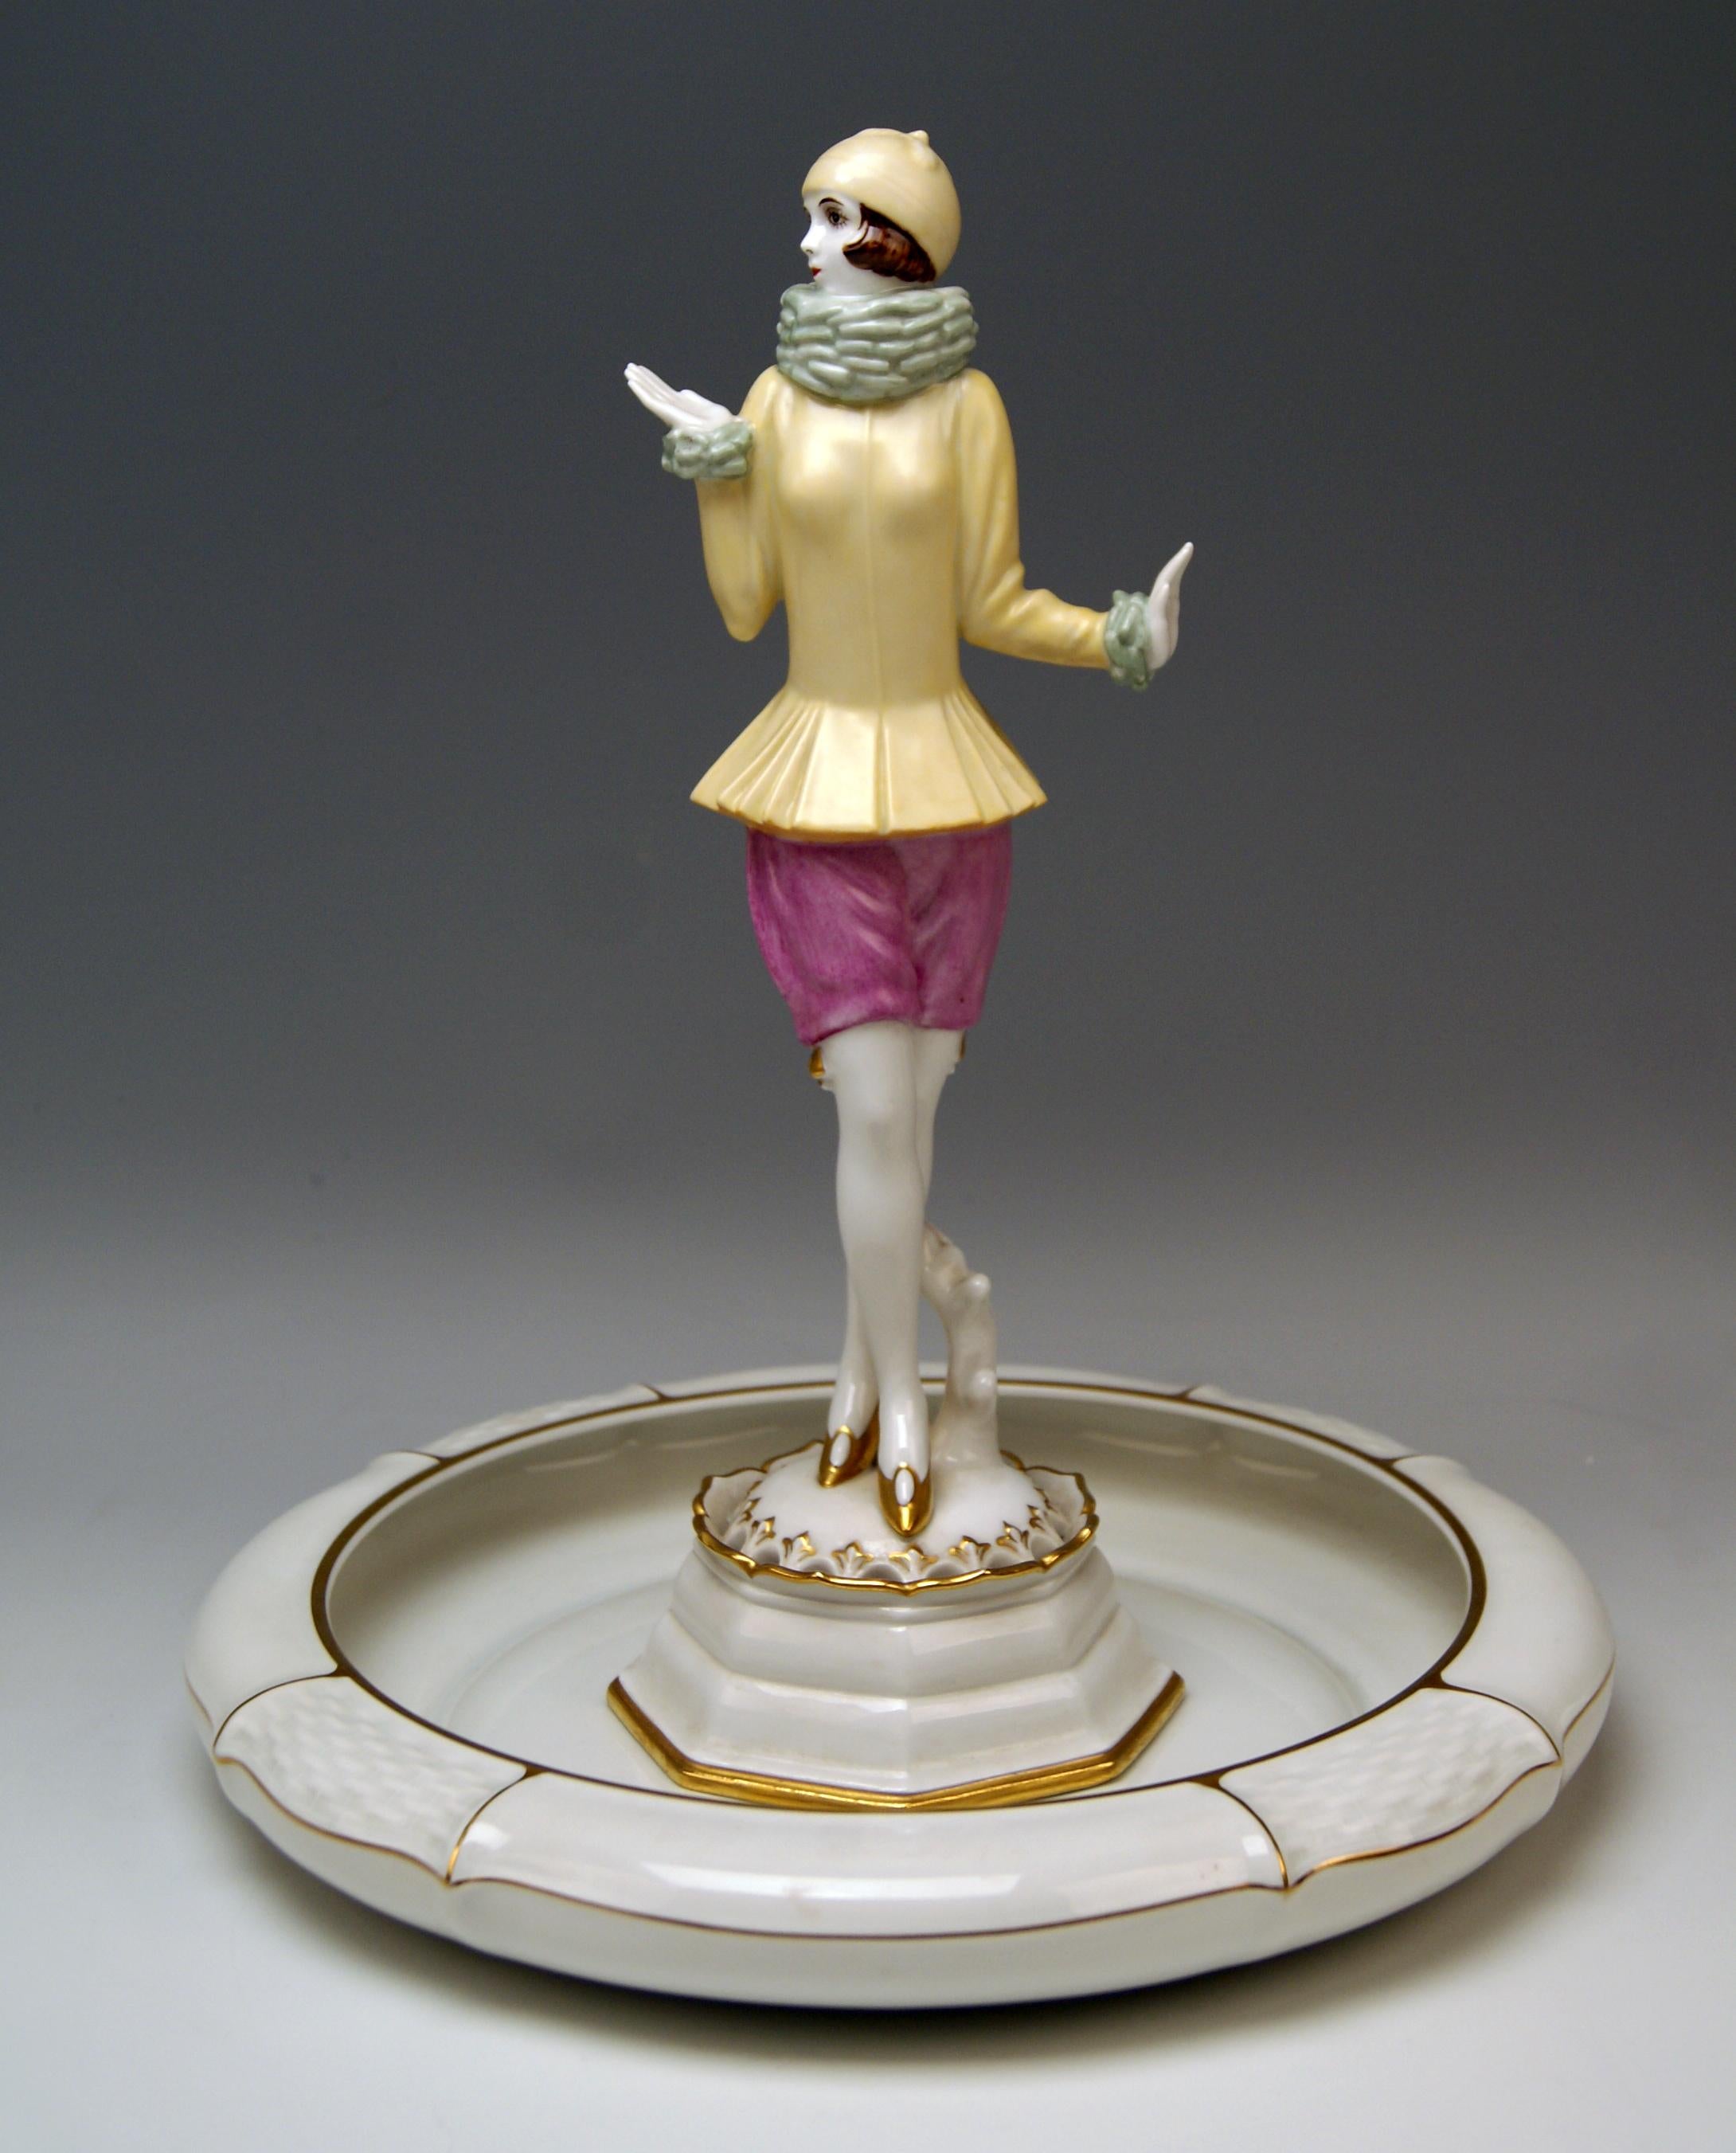 Lady Figurine 'YVONNE'
Slim lady wearing cap stands upright, clad in very special costume: Tight yellow jacket and woollen scarf covering woman's neck and short lilac trousers (hot pants). The woman is wearing golden high heels, having her legs